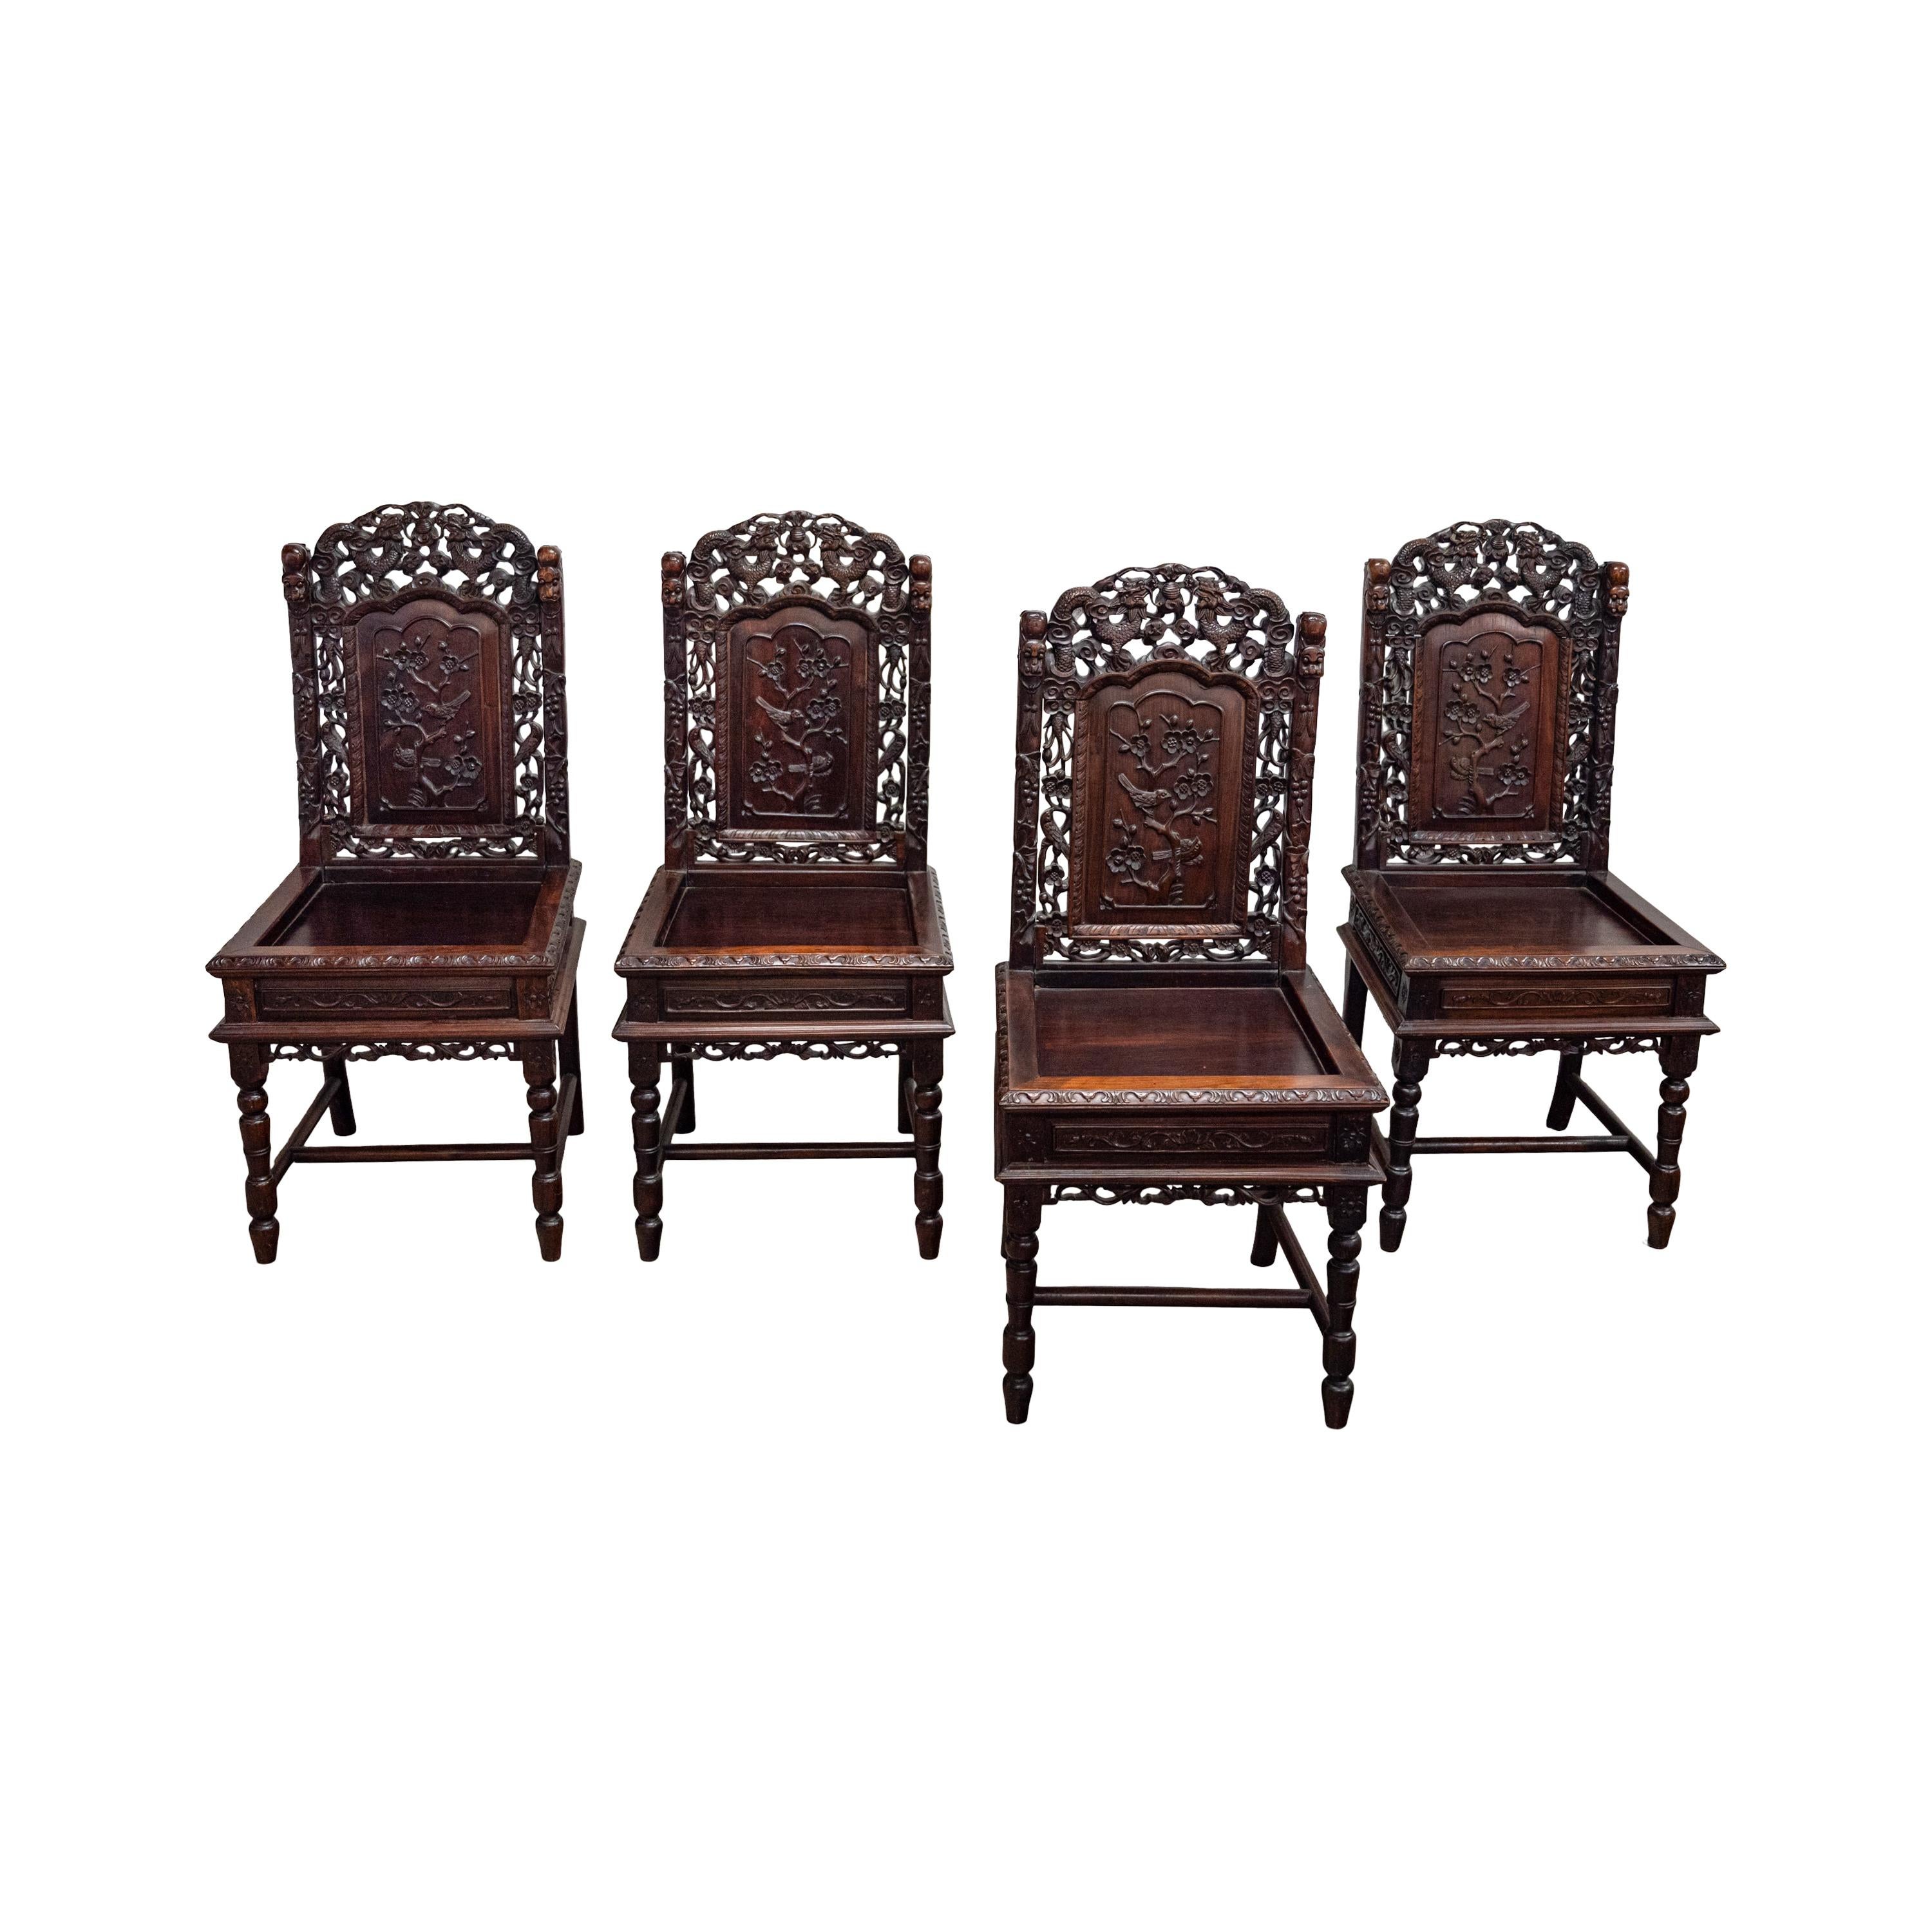 Four Antique Qing Dynasty Chinese Carved Rosewood Side Dining Dragon Chairs 1880 For Sale 5